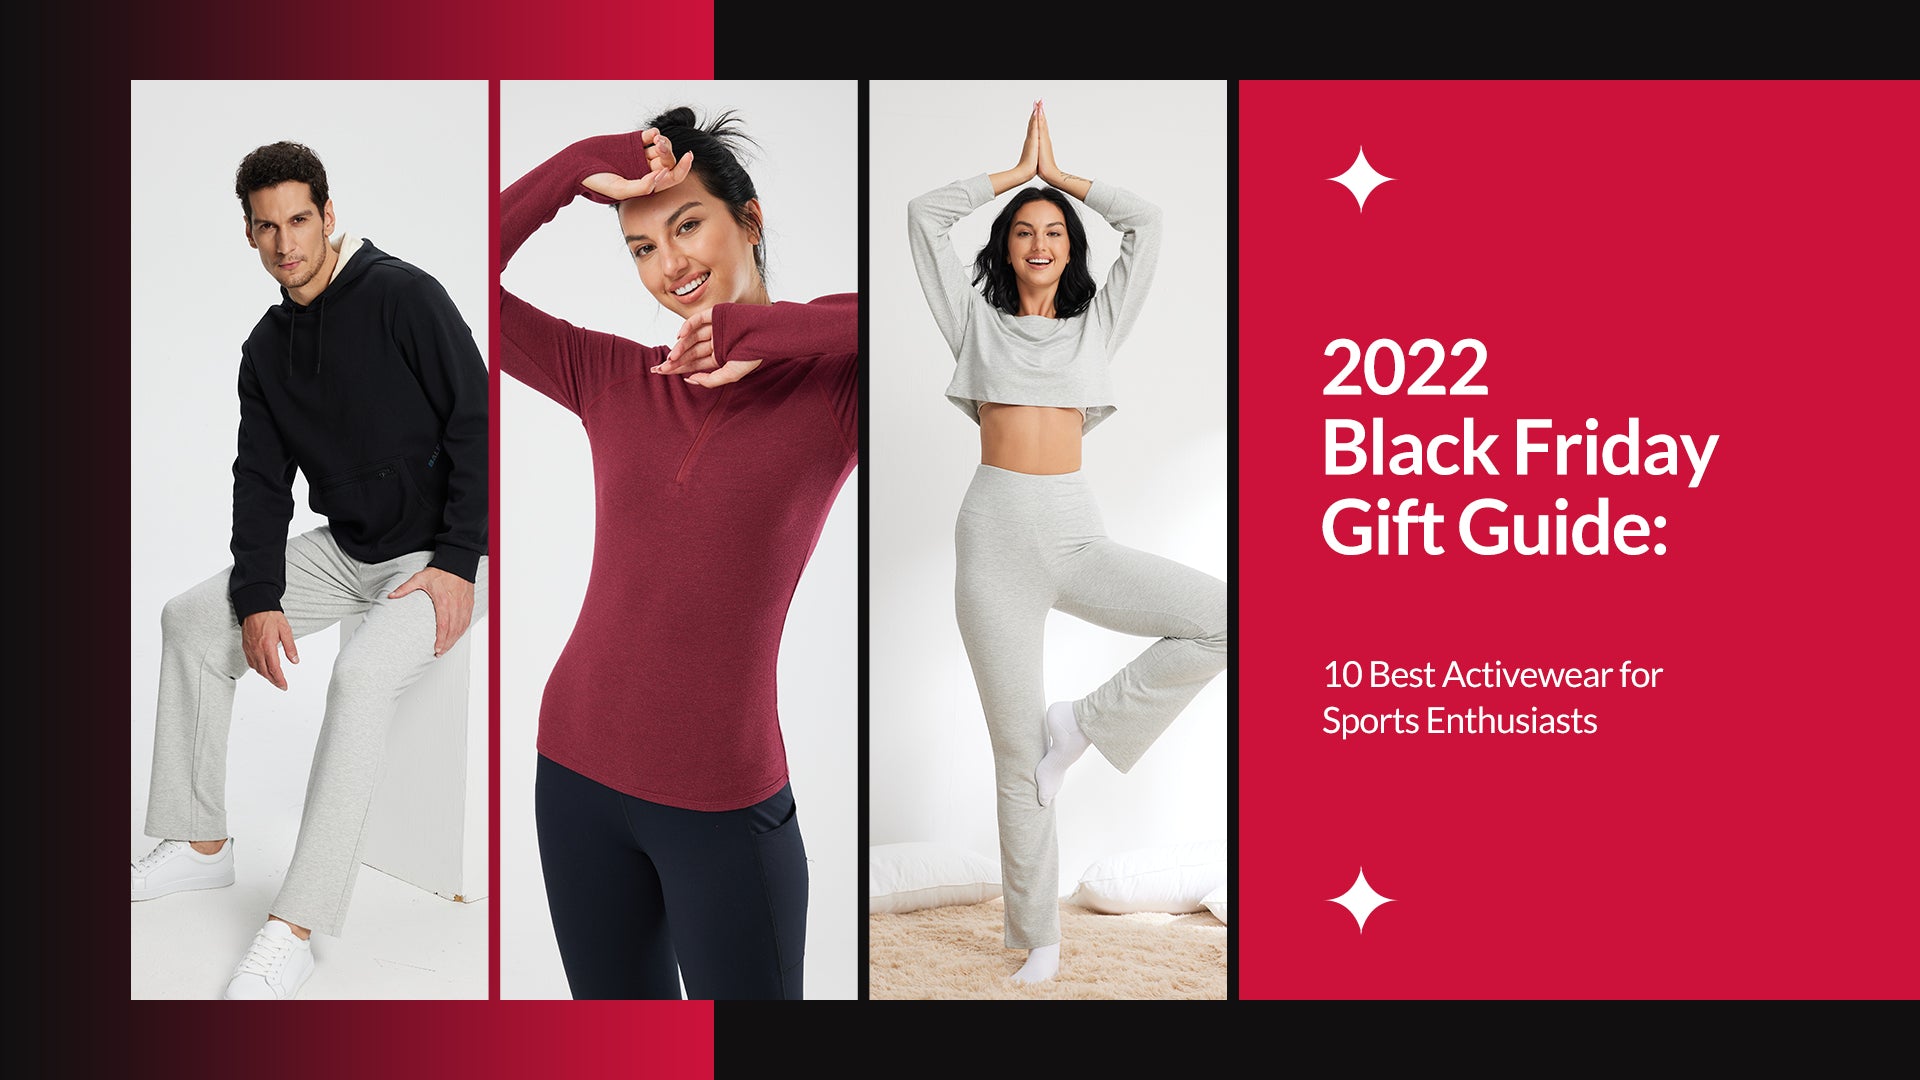 2022 Black Friday Gift Guide: 10 Best Activewear for Sports Enthusiasts